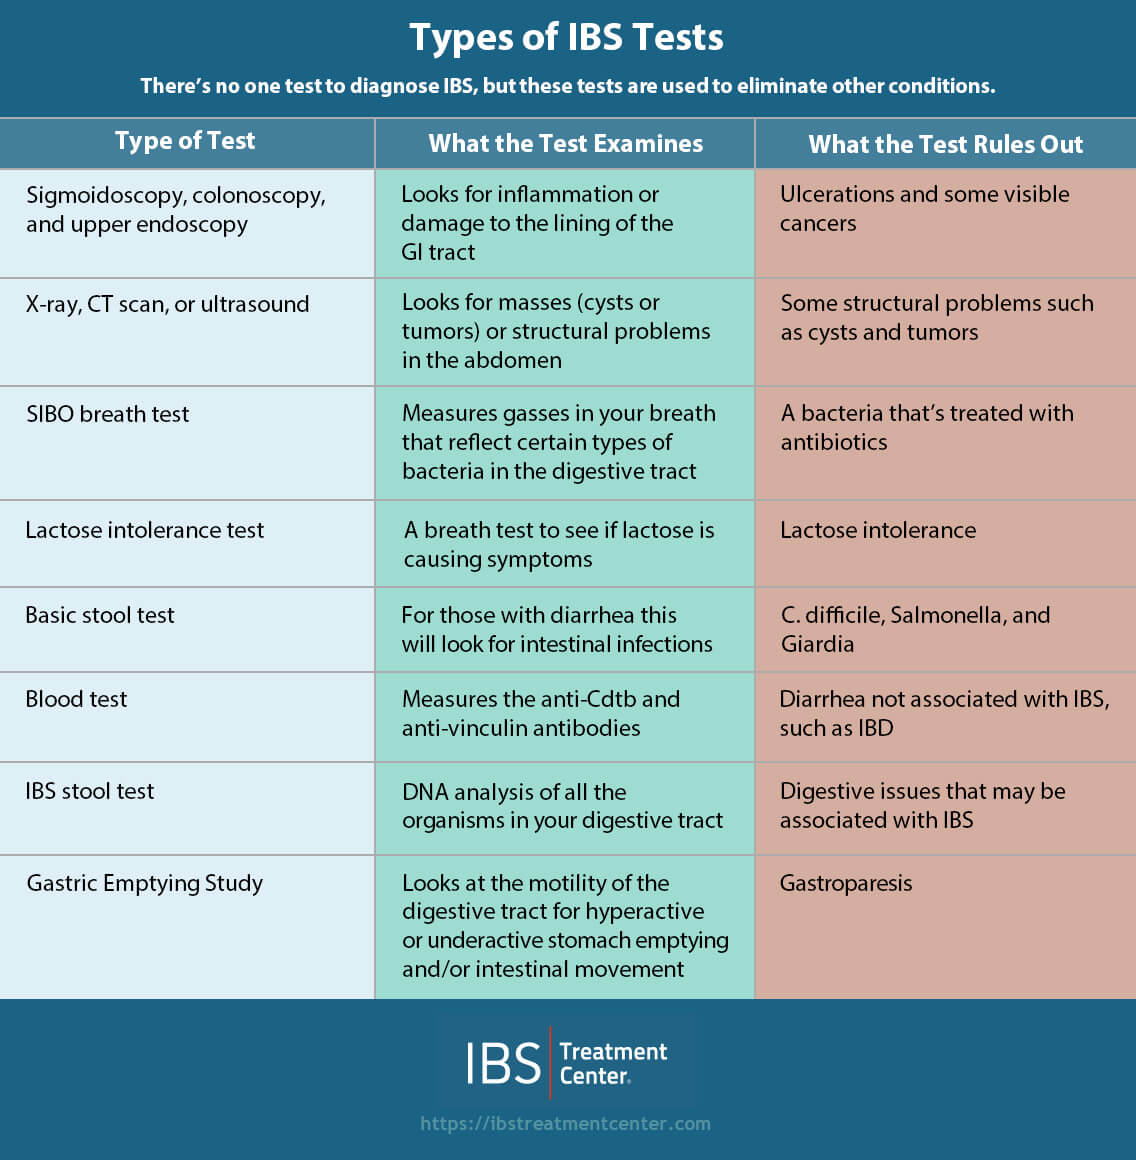 Types of IBS Tests